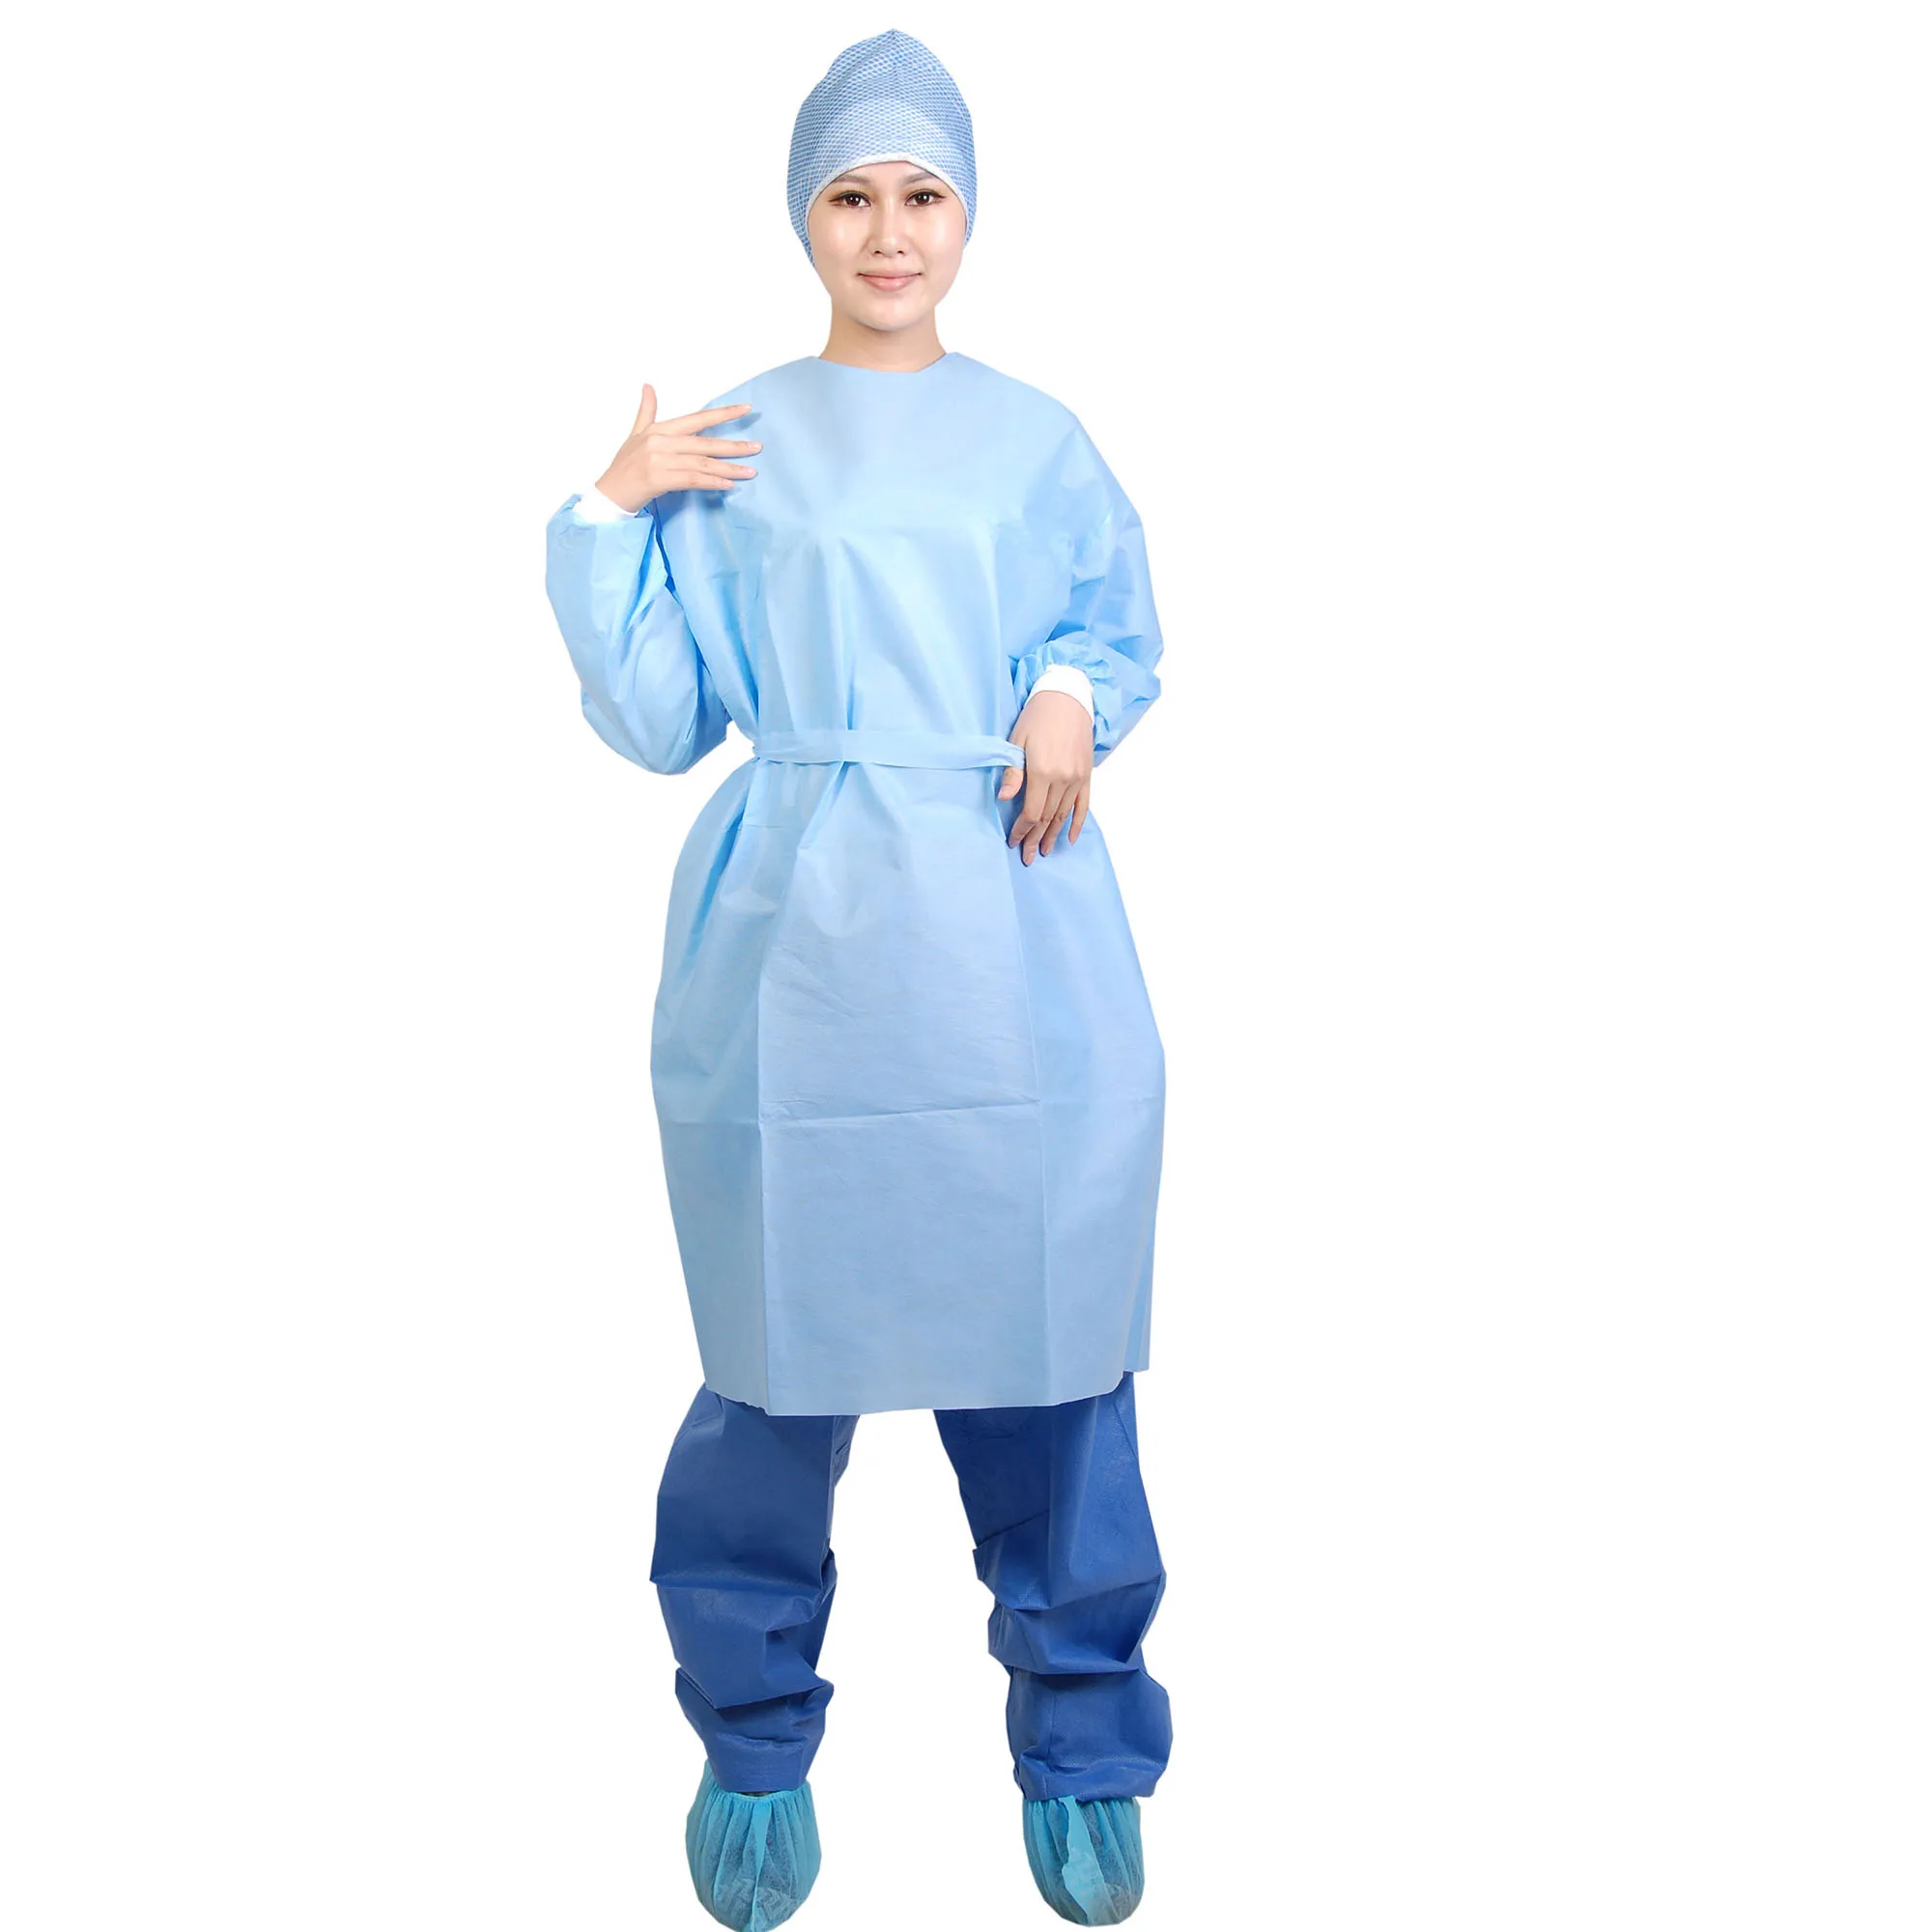 Халат хирургический этикетка. Lovepik-image-of-a-Surgeon-wearing-a-Surgical-Gown-PNG-image_401730048_wh1200.